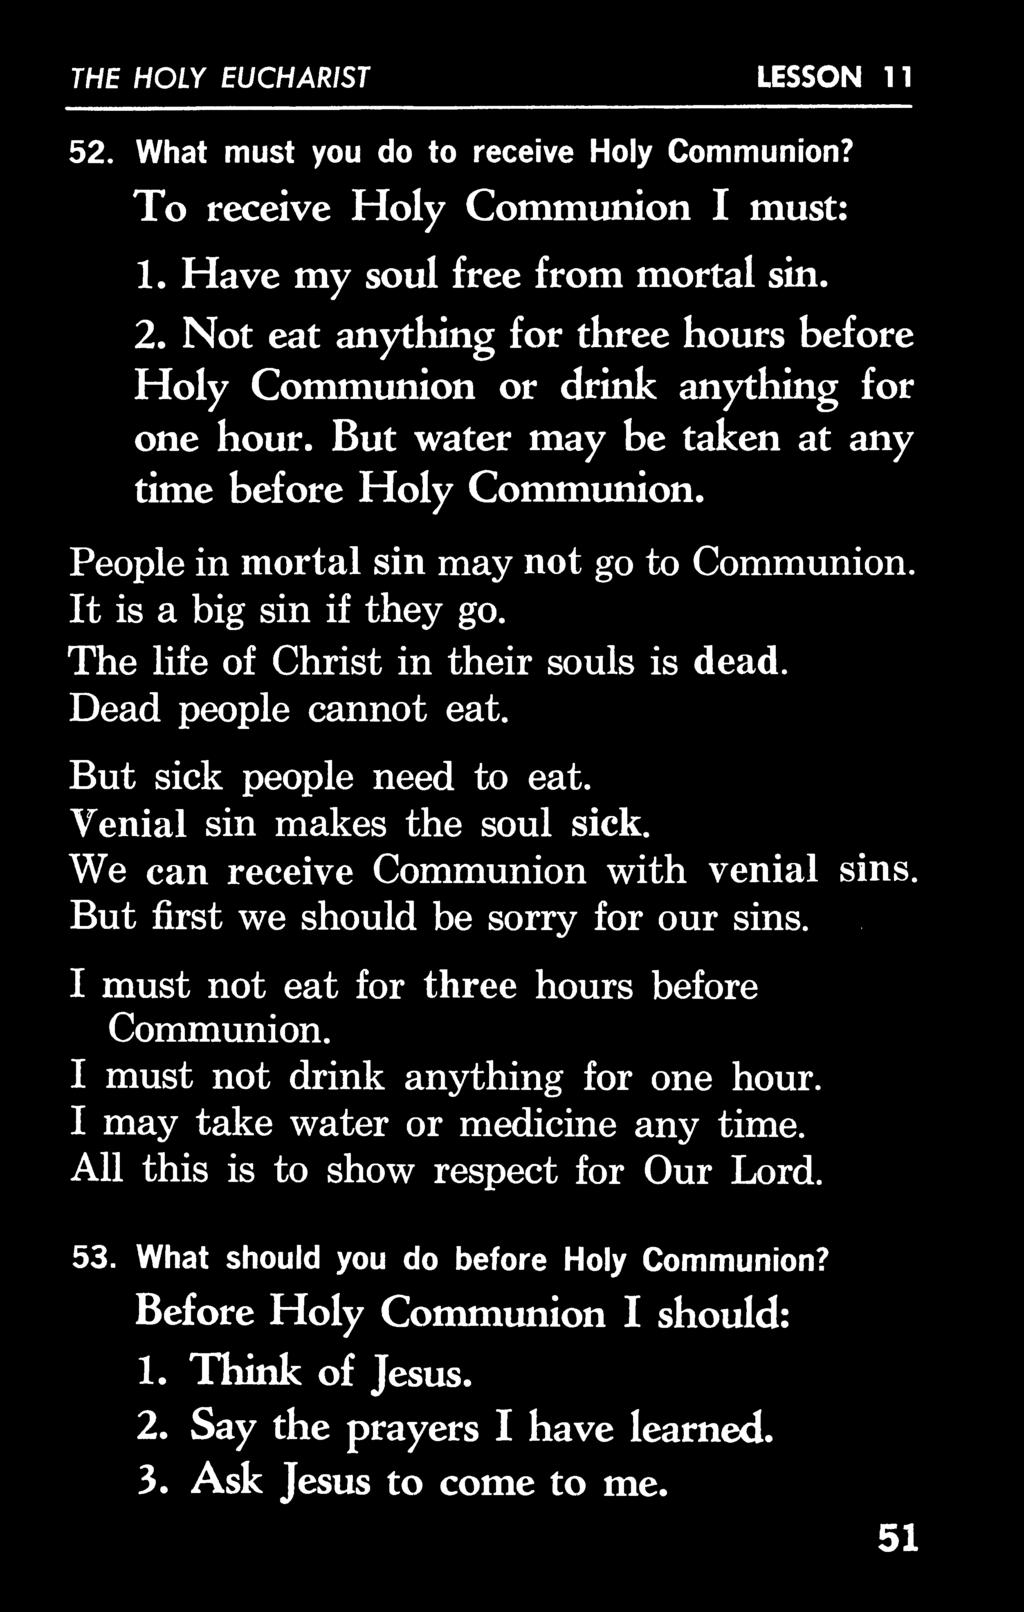 It is a big sin if they go. The life of Christ in their souls is dead. Dead people cannot eat. But sick people need to eat. Venial sin makes the soul sick. We can receive Communion with venial sins.